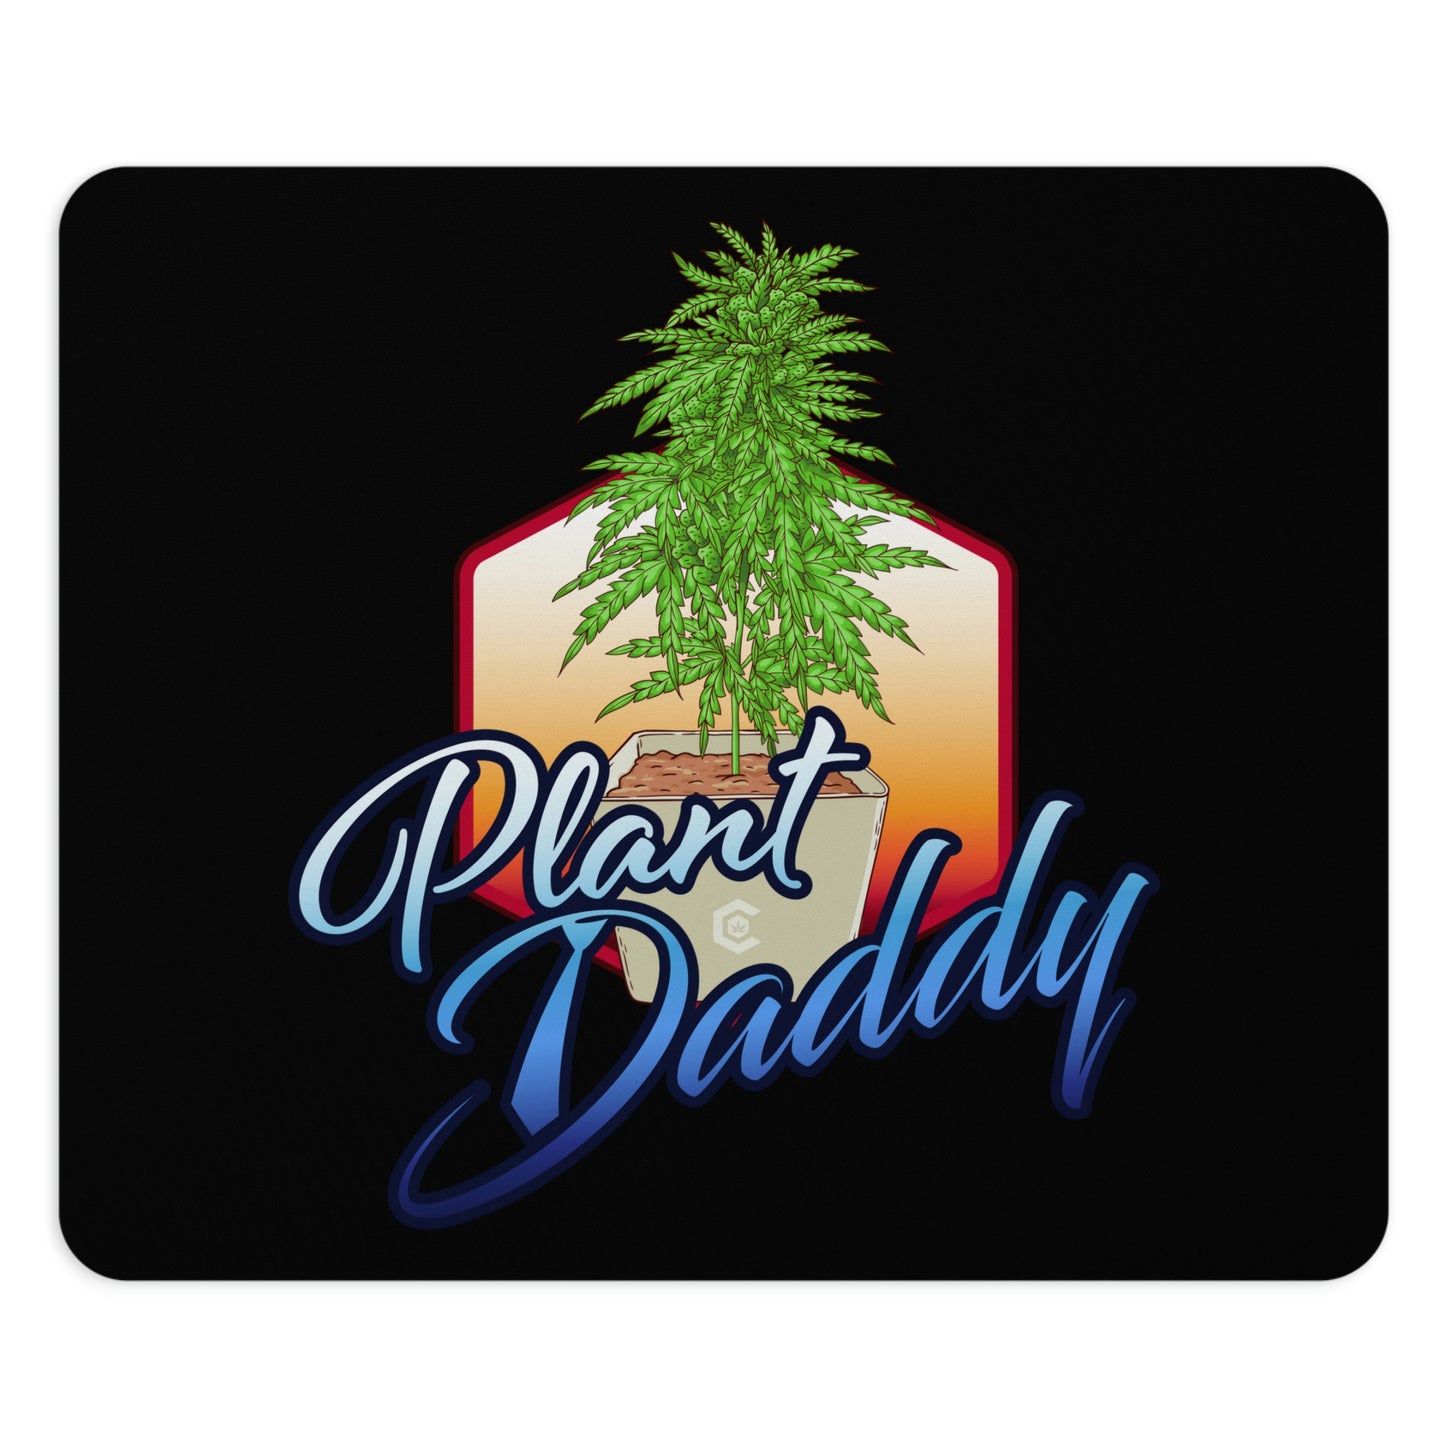 A cool square playful design of the Plant Daddy Cannabis Mouse Pad.